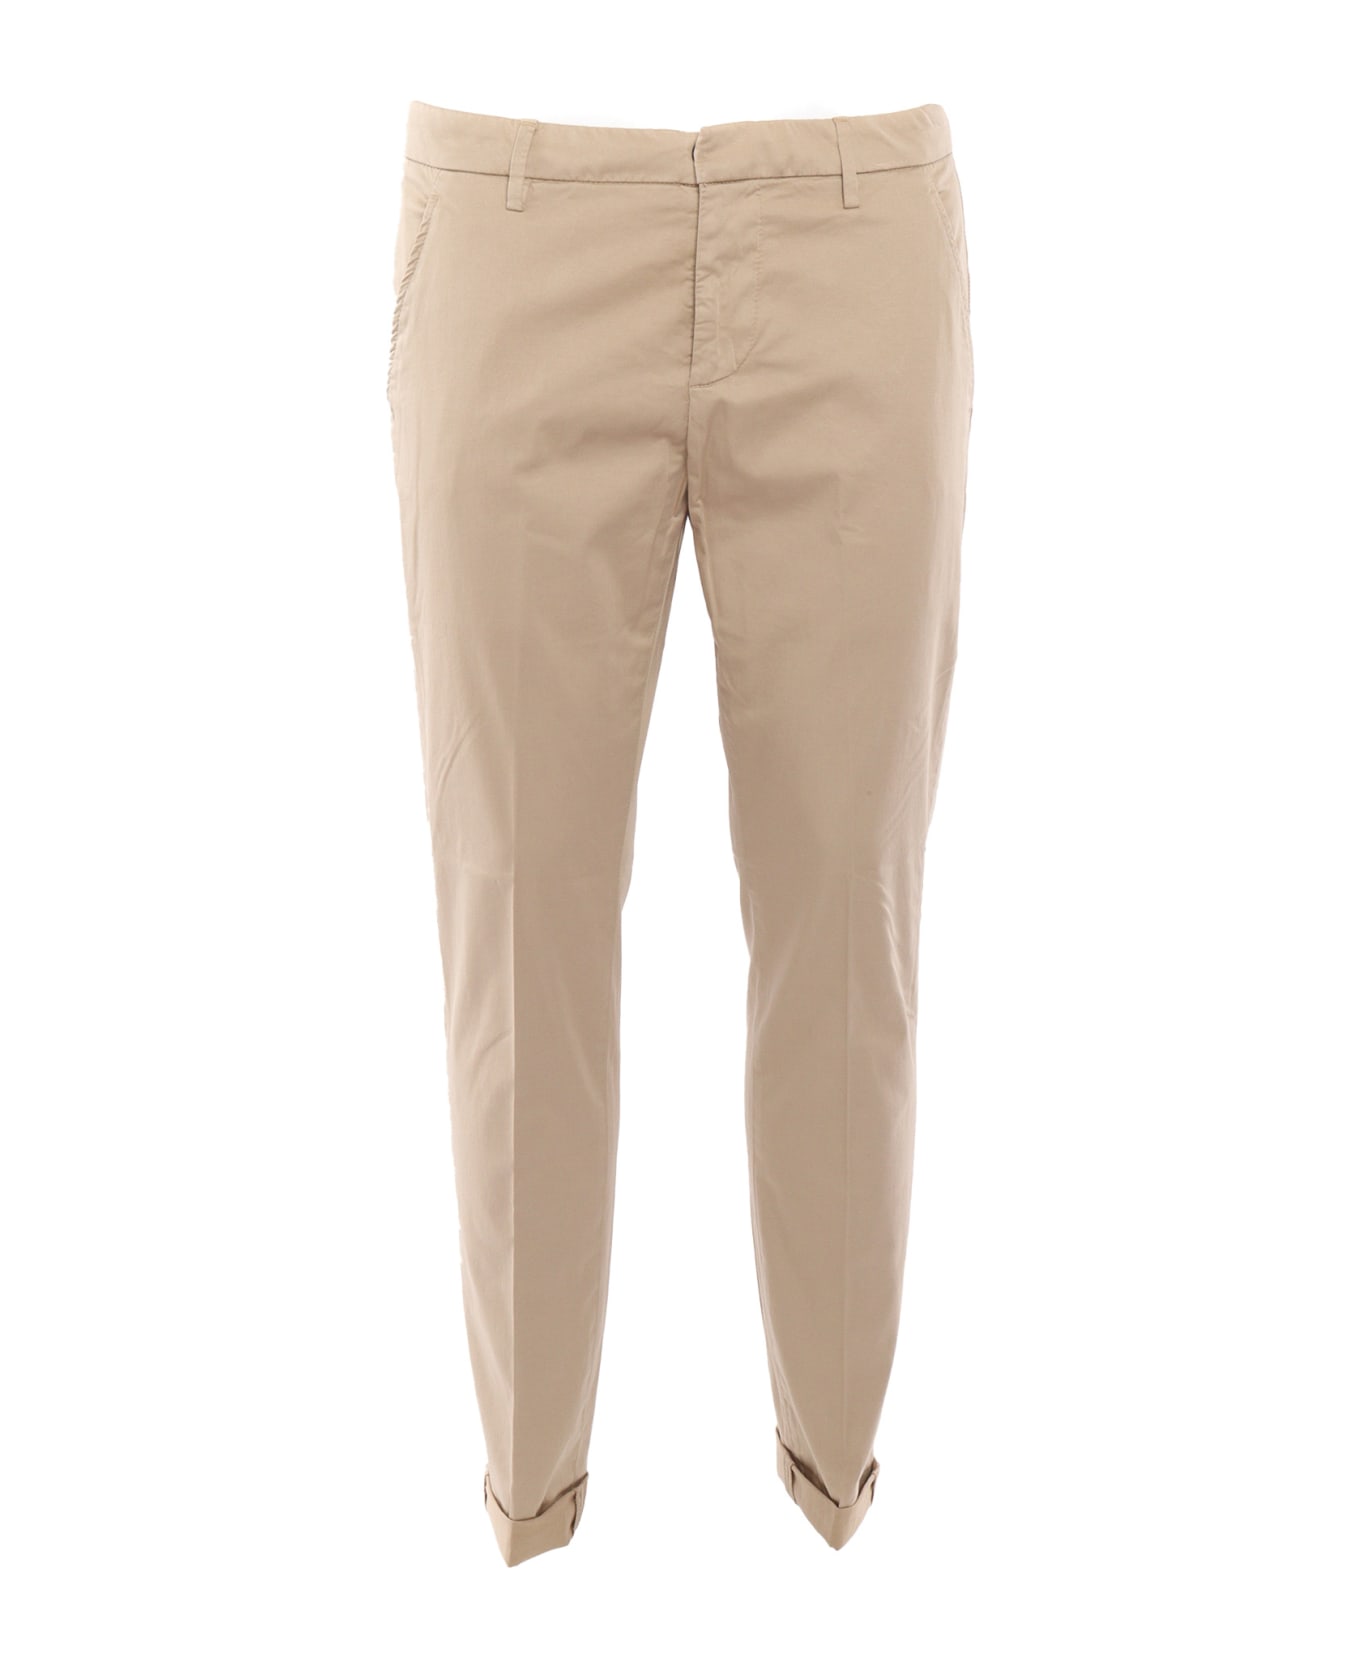 Dondup Beige Chino Trousers - BEIGE